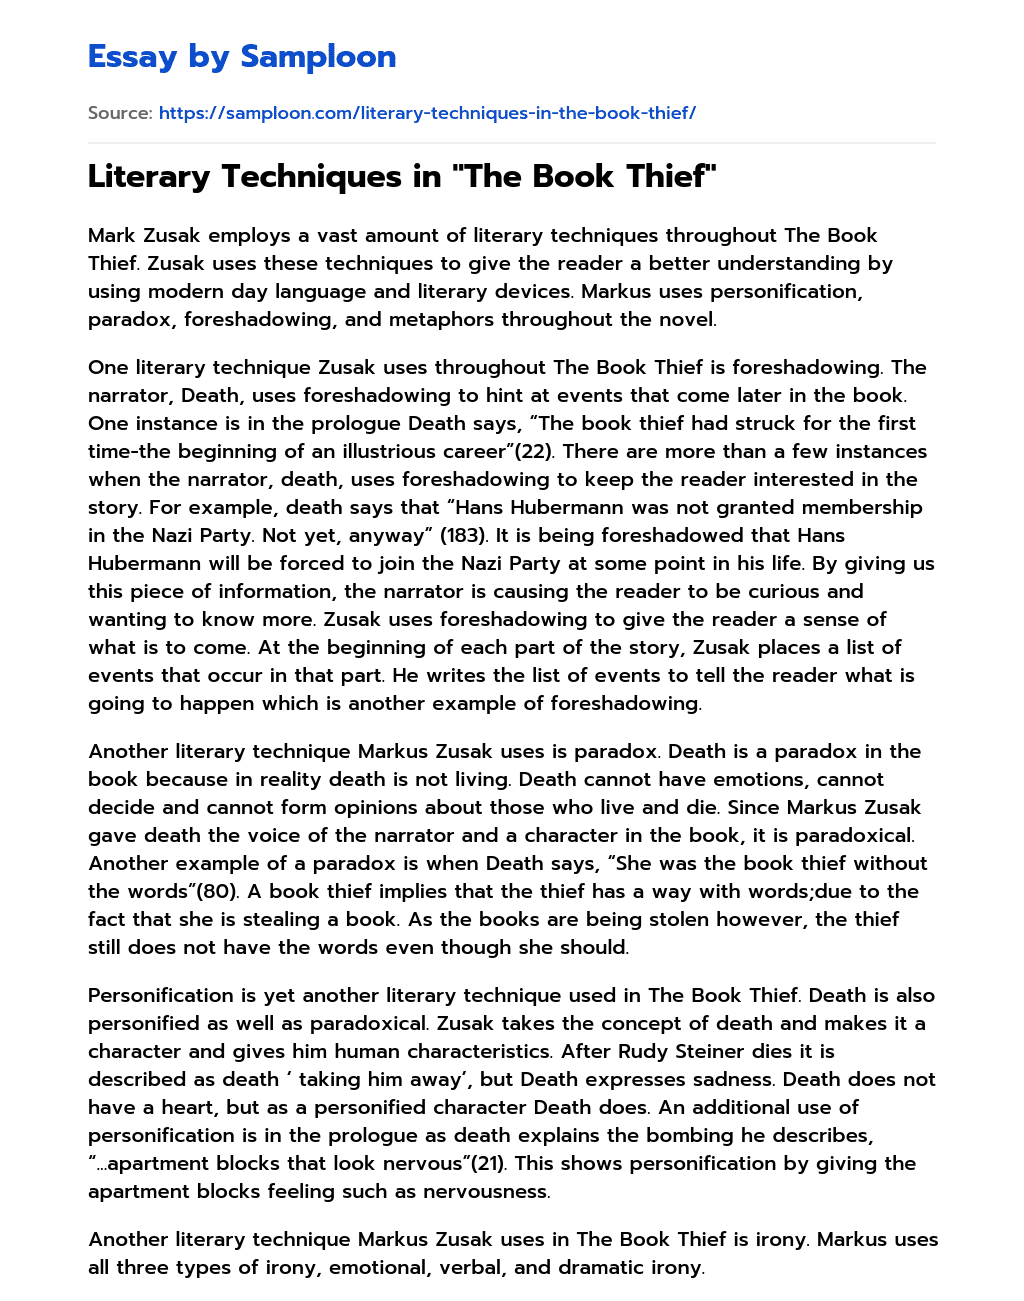 thesis statement for book thief